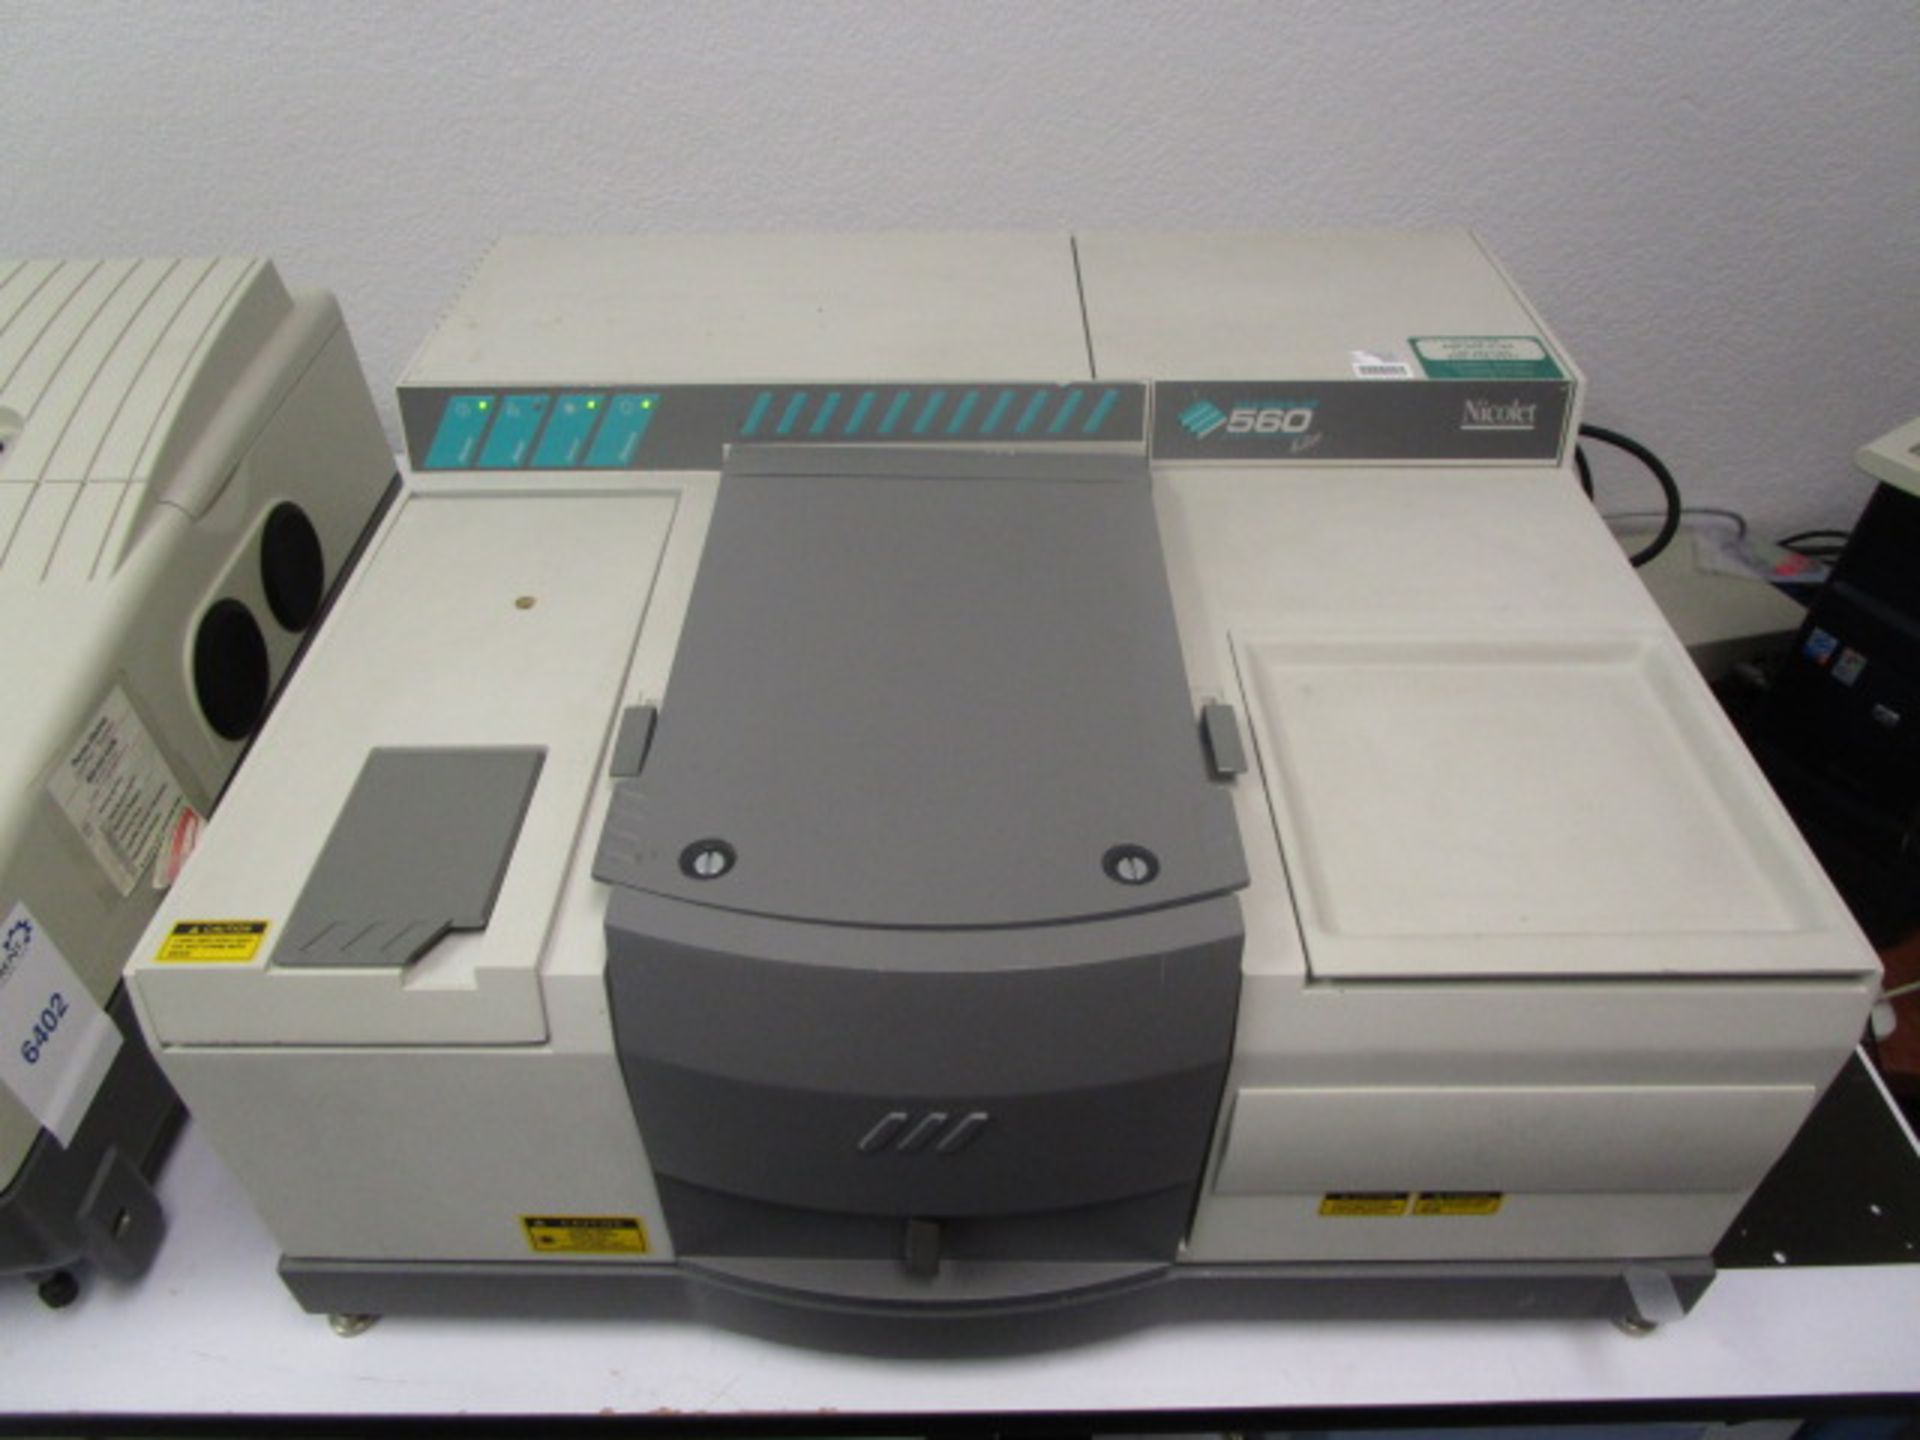 Nicolet Magna- IR 560 Spectromer E.S.P. to include software tutorial, and "32 bit" SW. Near and - Image 18 of 31